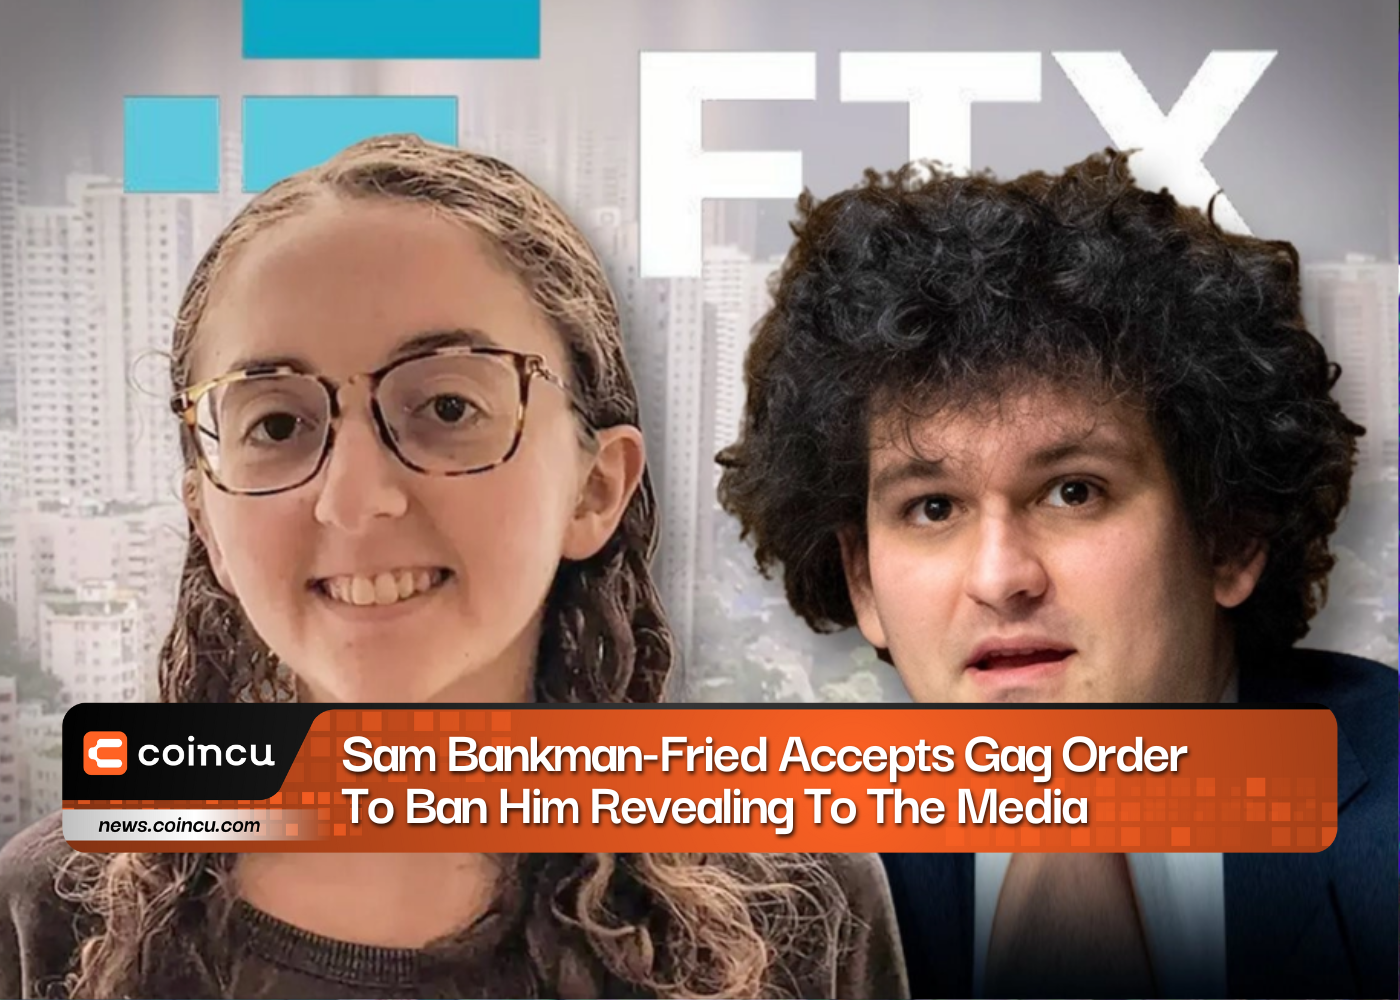 Sam Bankman-Fried Accepts Gag Order To Ban Him Revealing To The Media